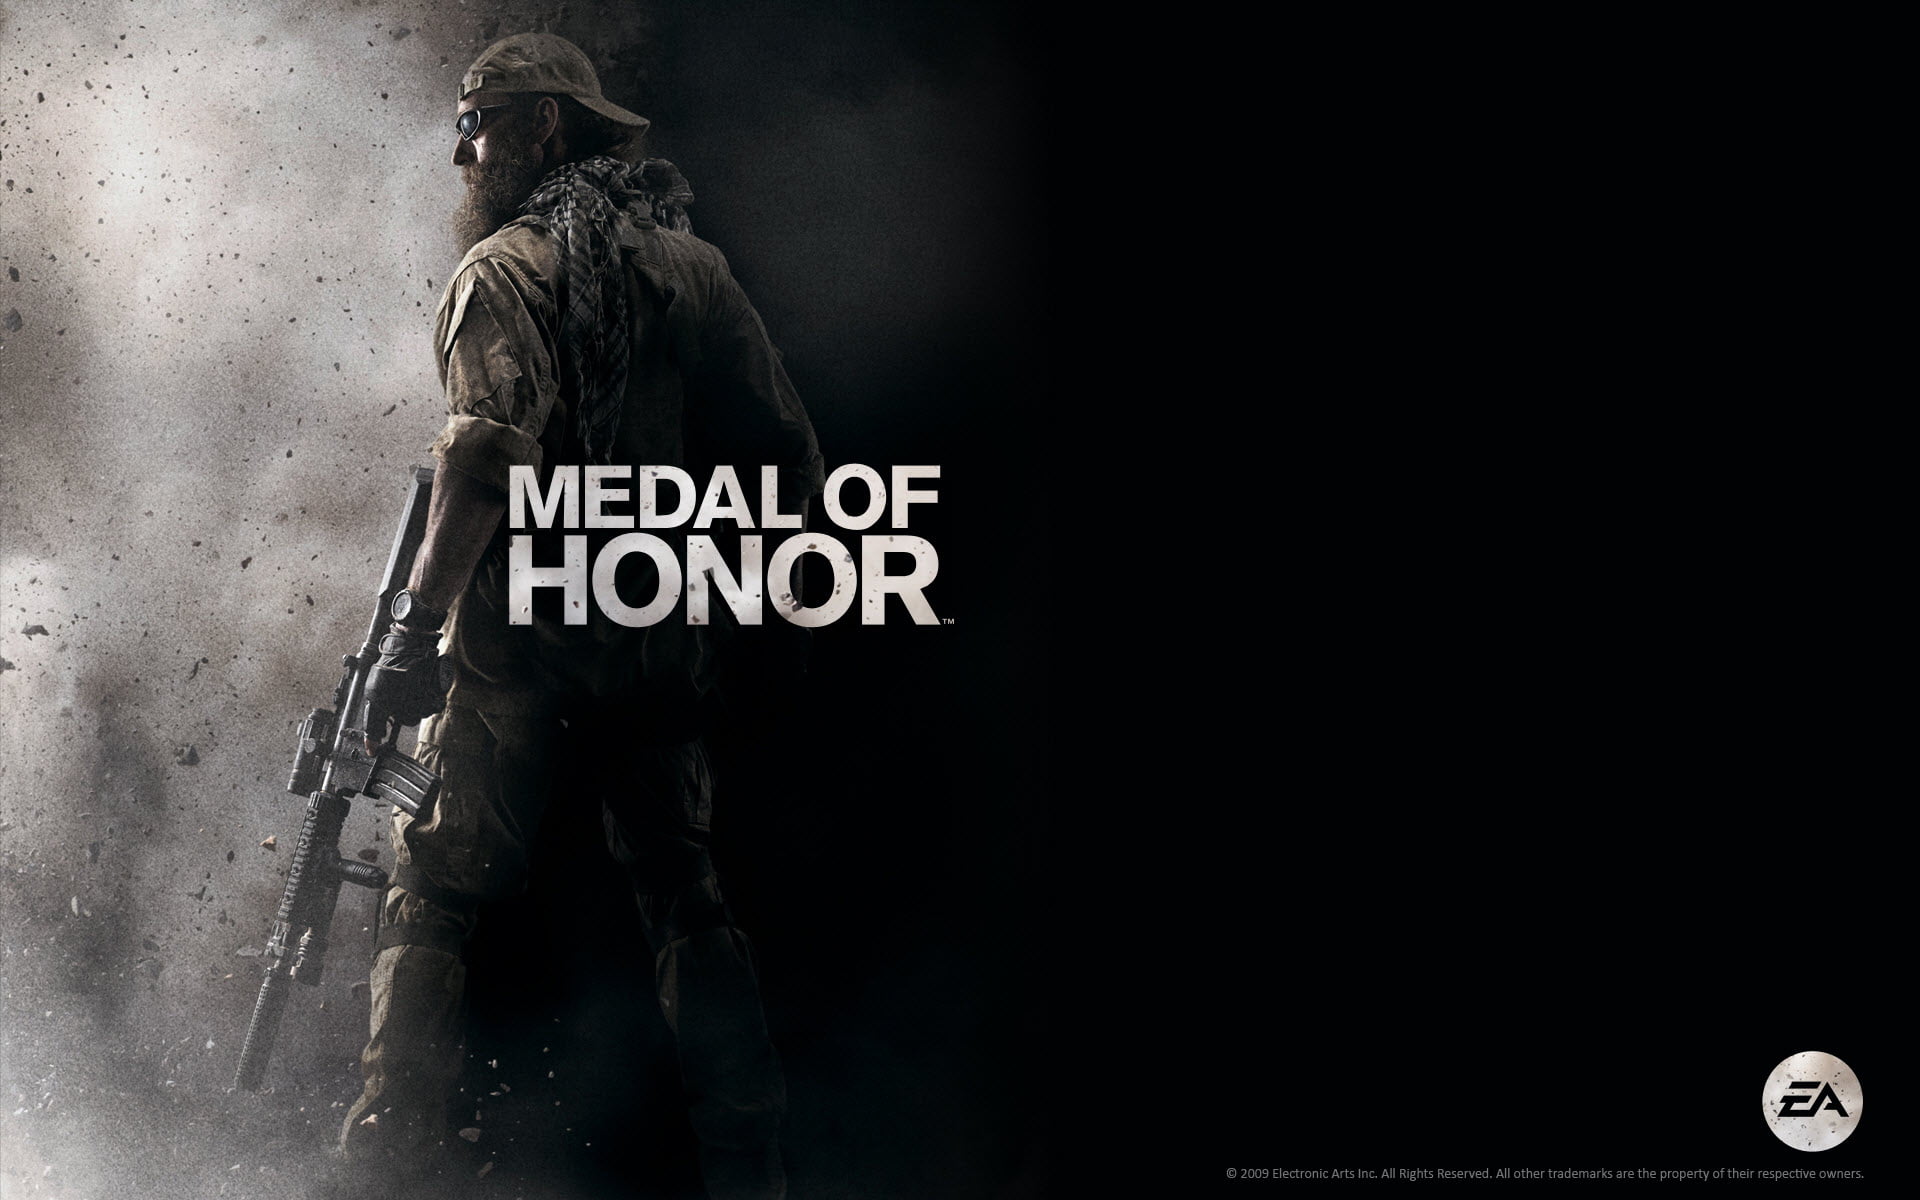 Medal of Honor, video games, communication, text, one person